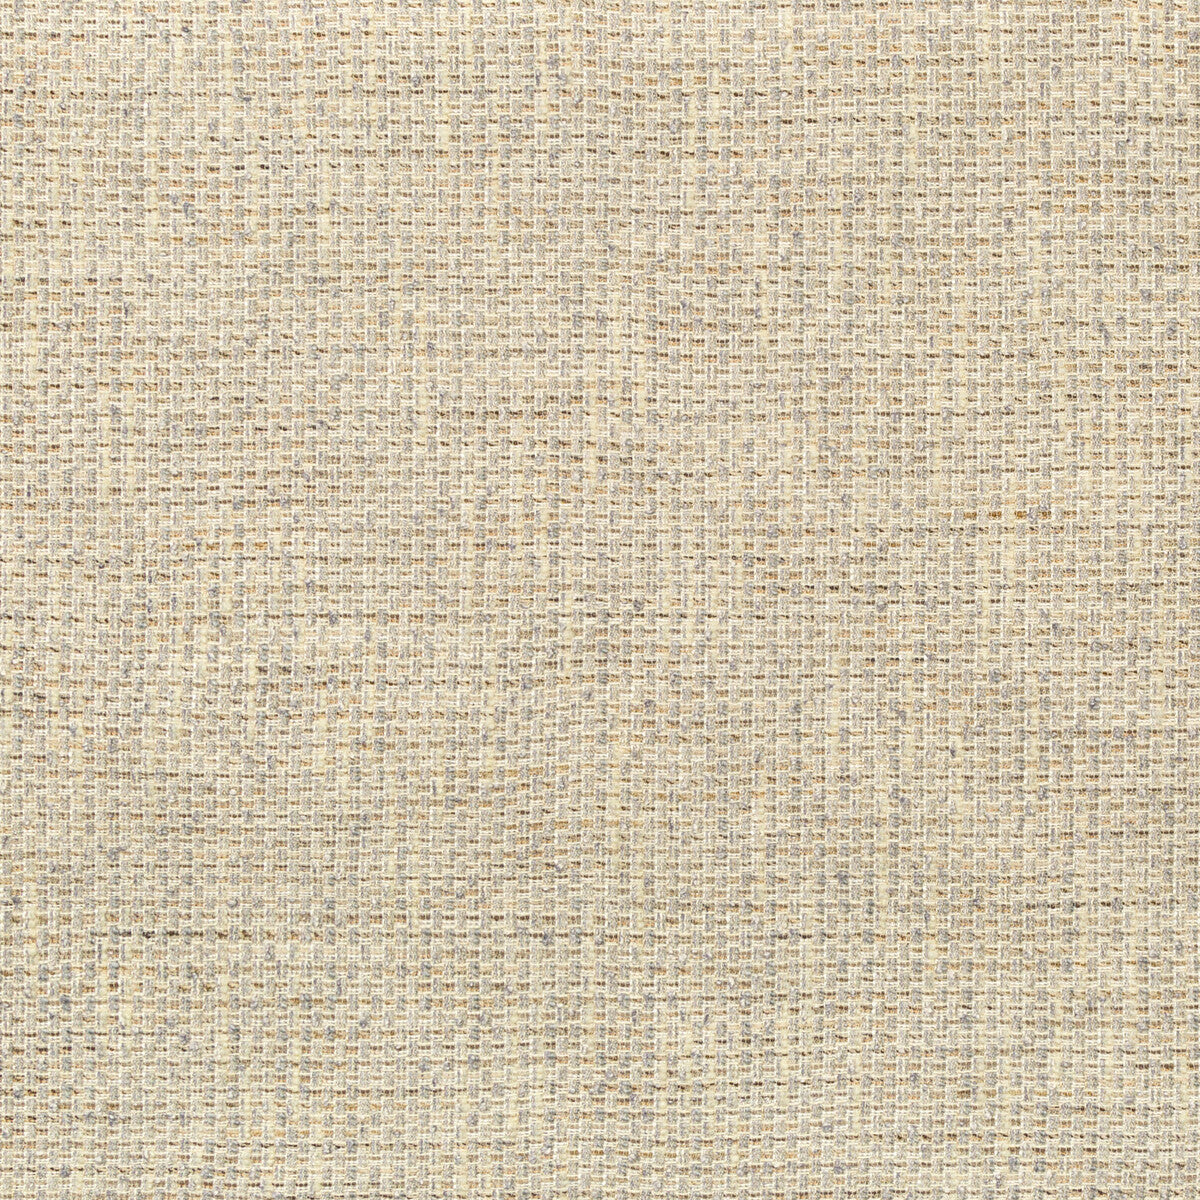 Walk About fabric in pebble color - pattern 34876.11.0 - by Kravet Couture in the Modern Colors-Sojourn Collection collection